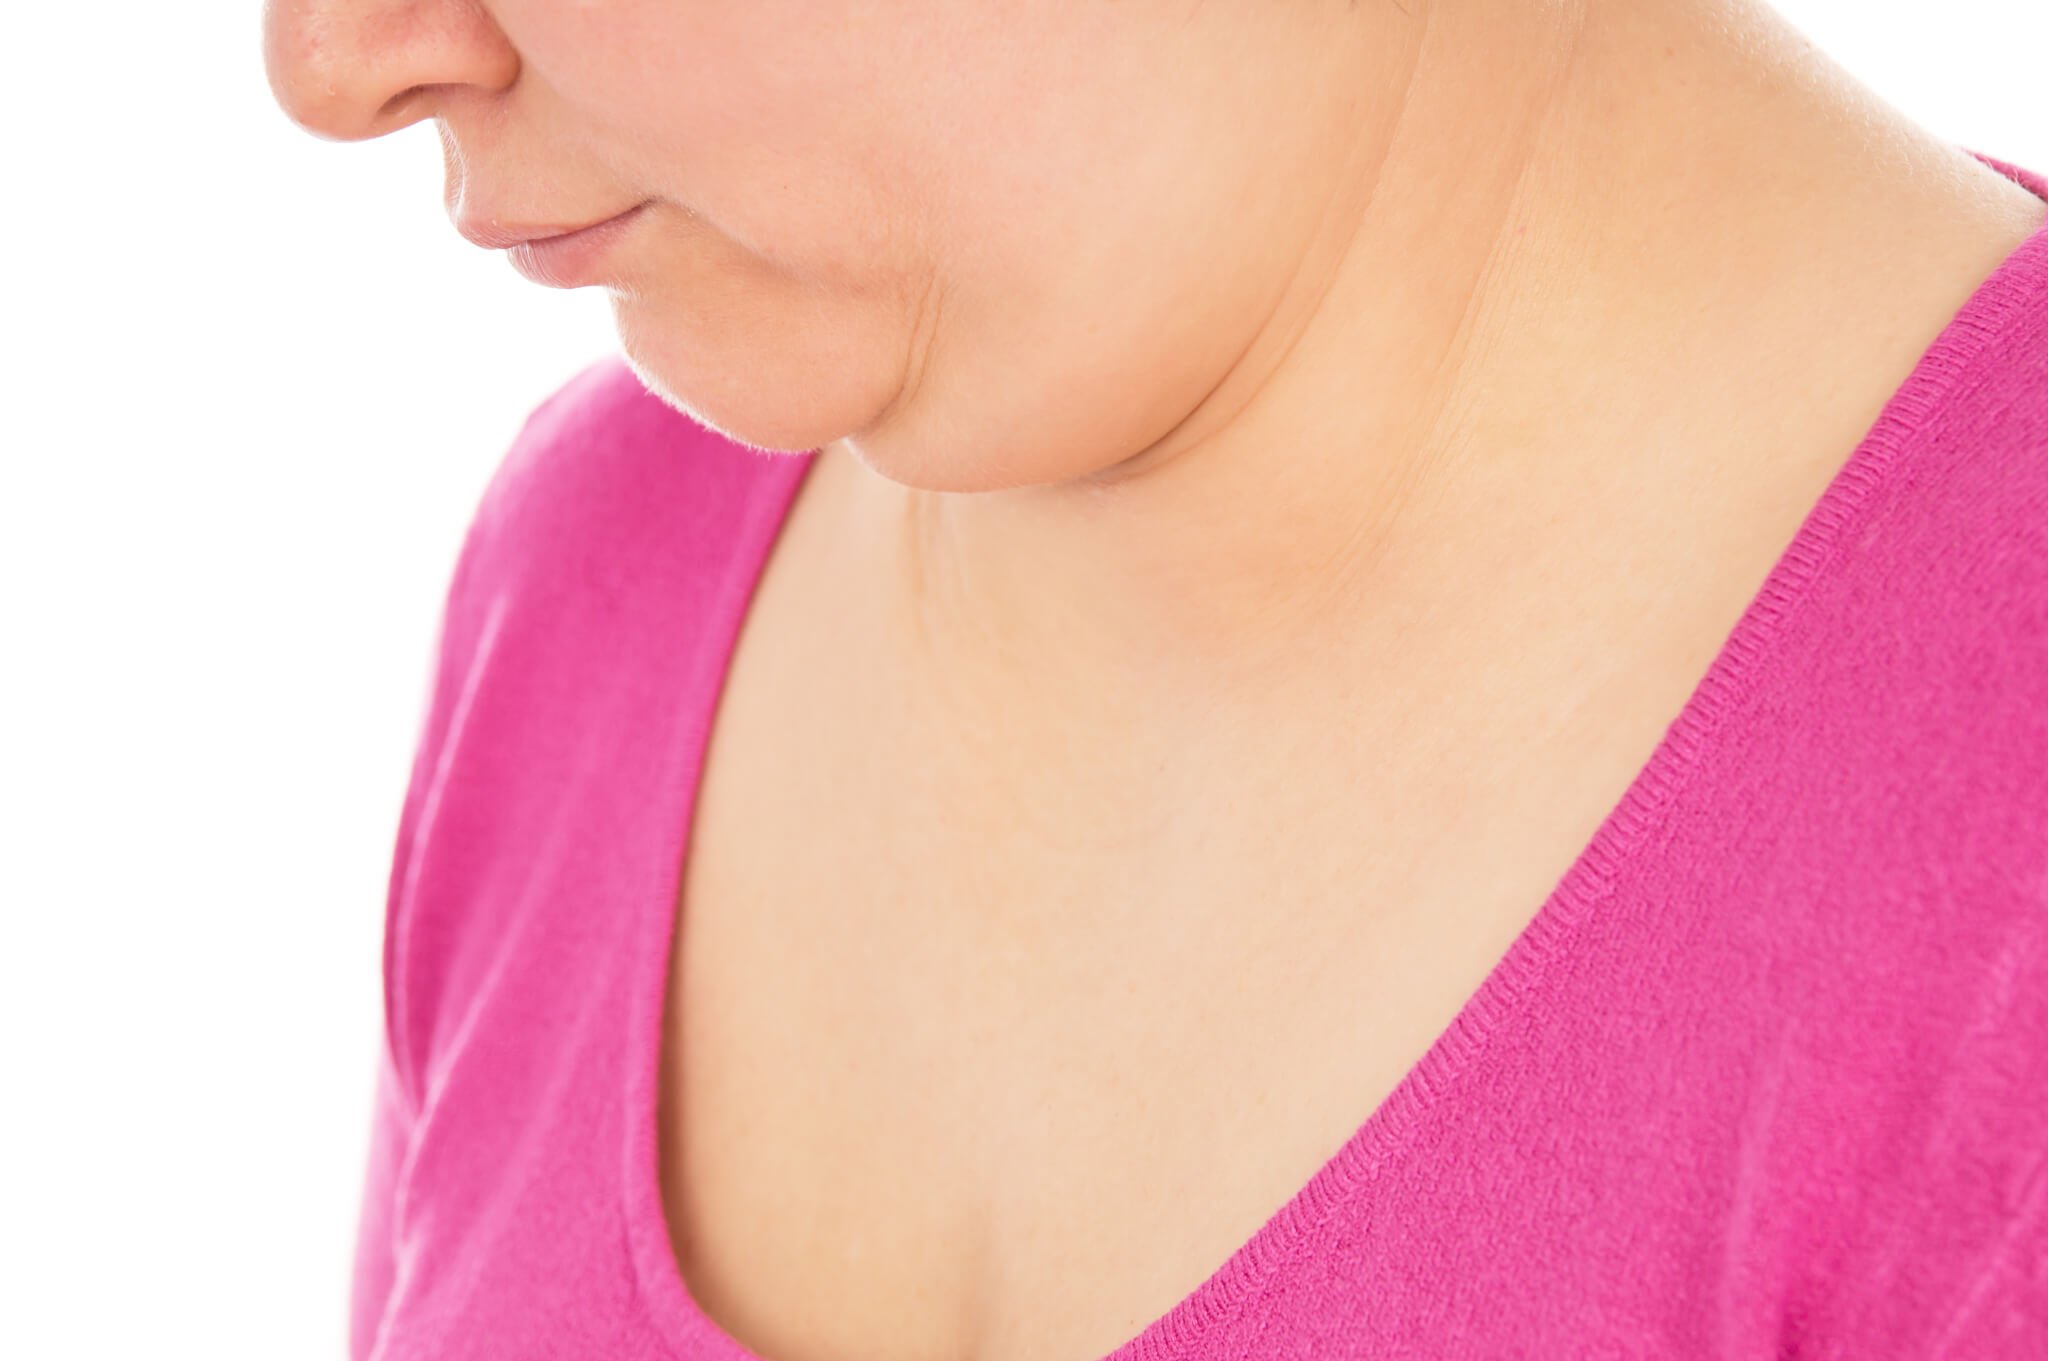 Treating a Double Chin With CoolSculpting or Kybella